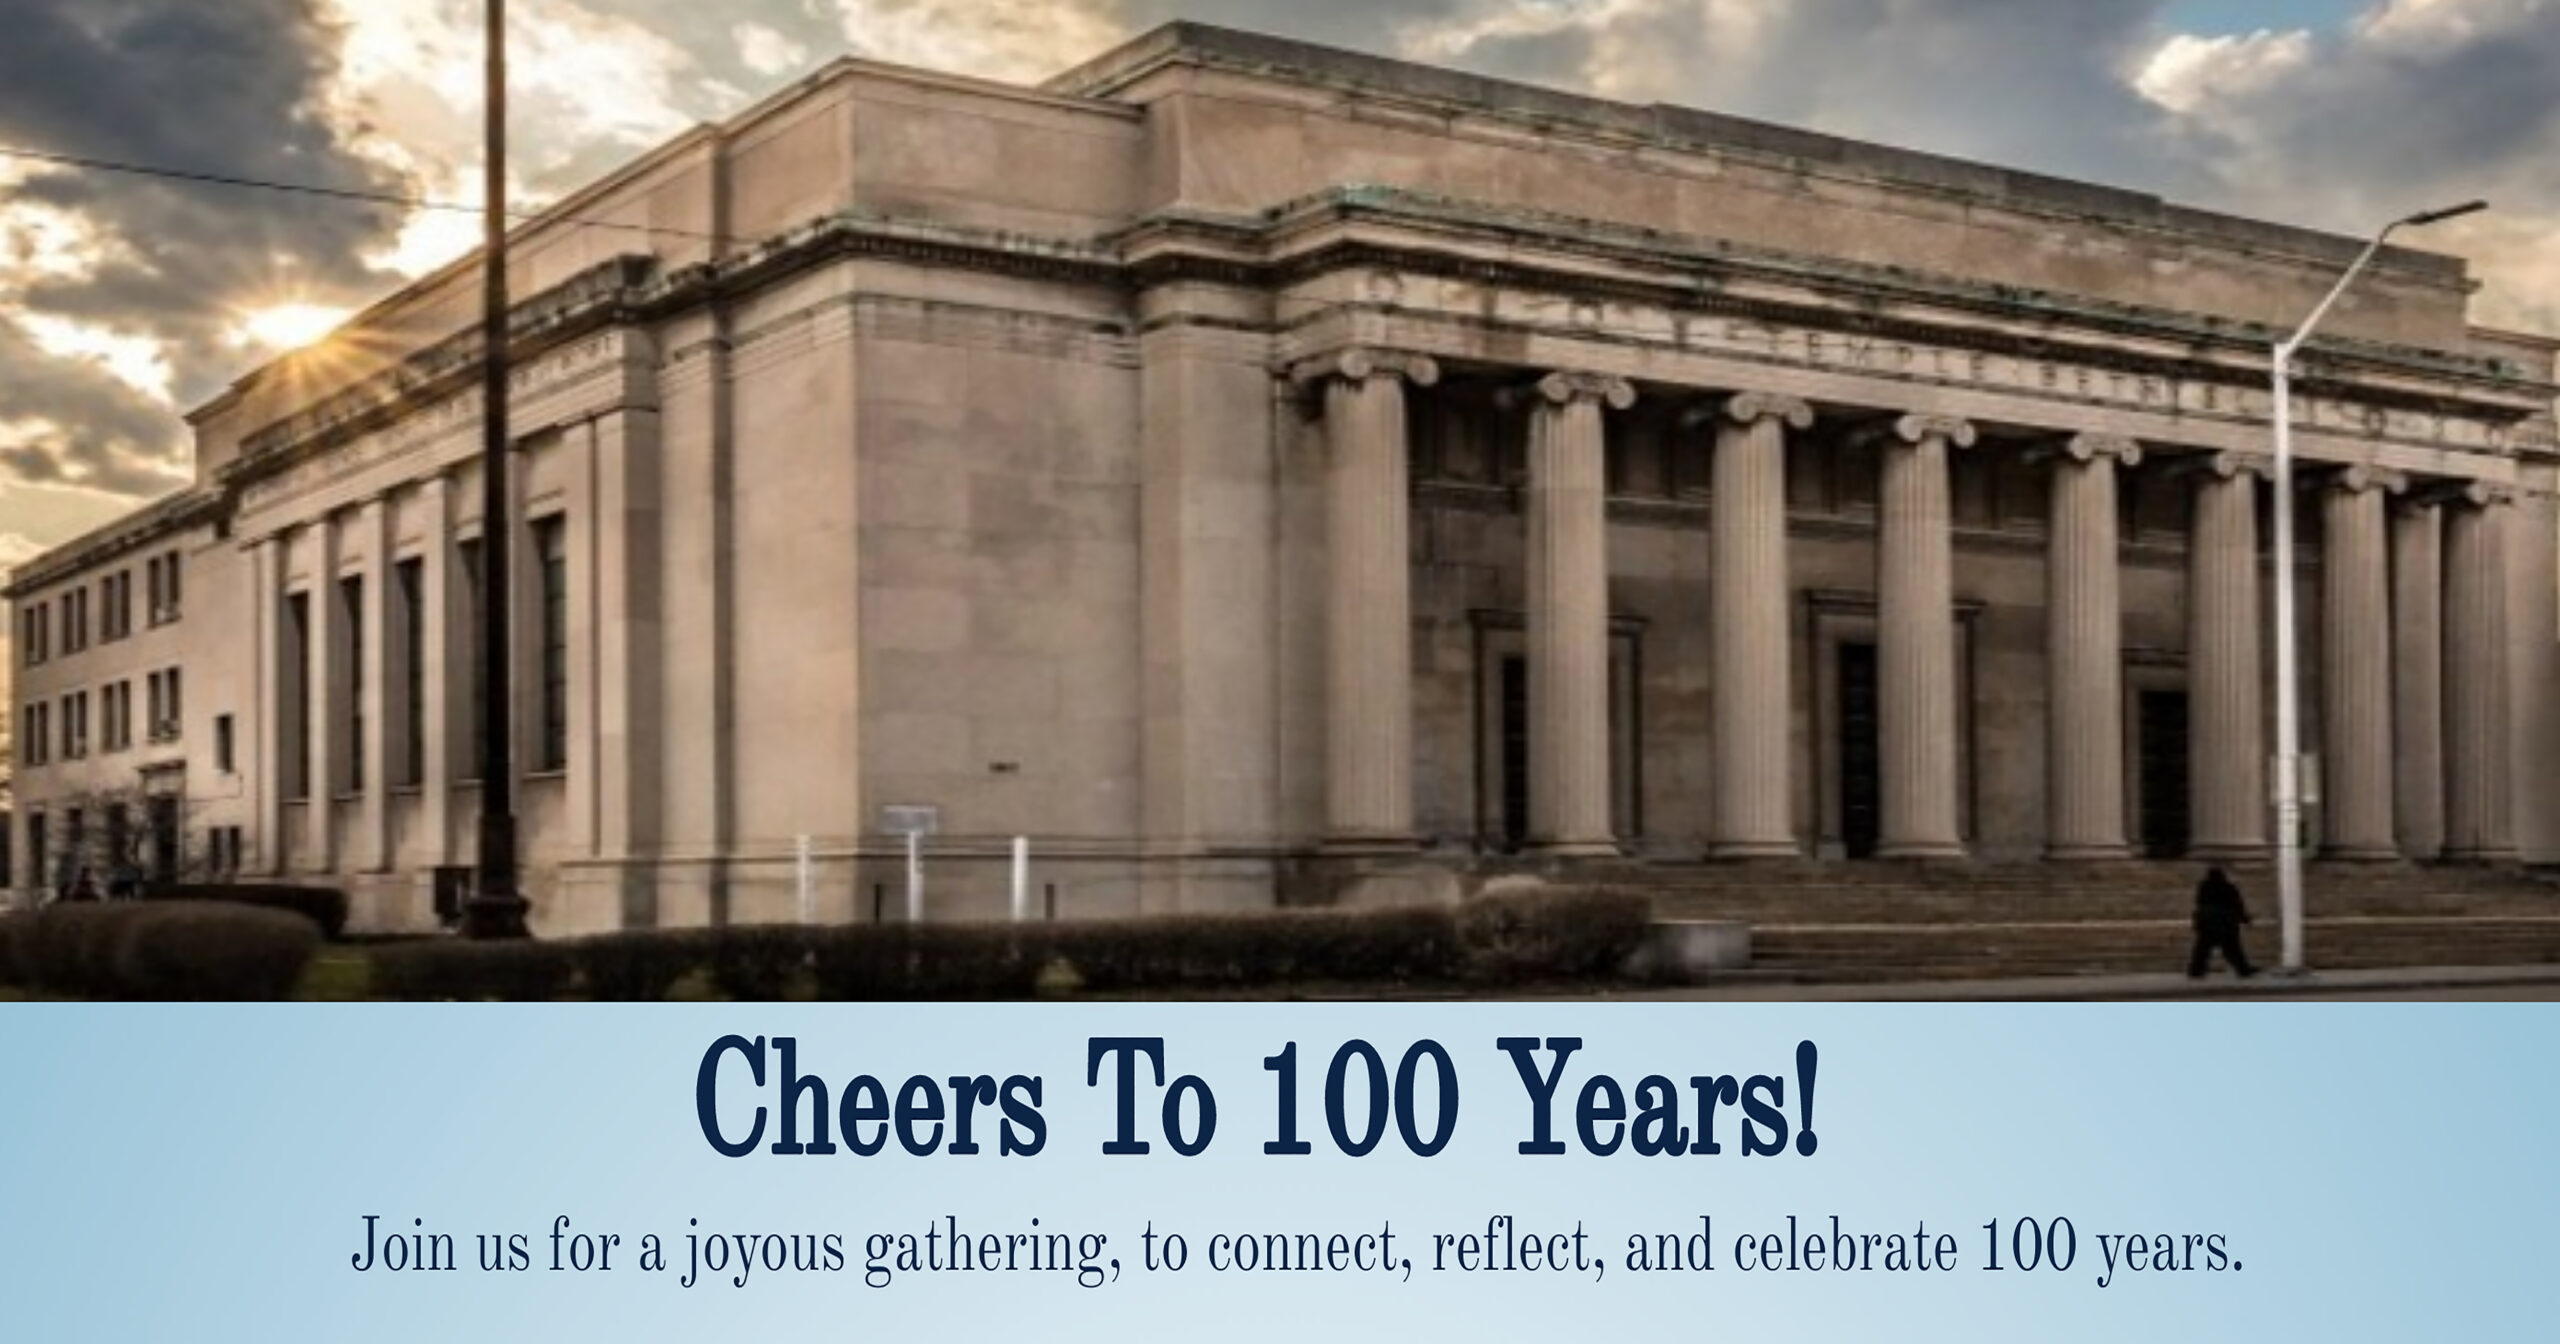 Cheers to 100 Years!